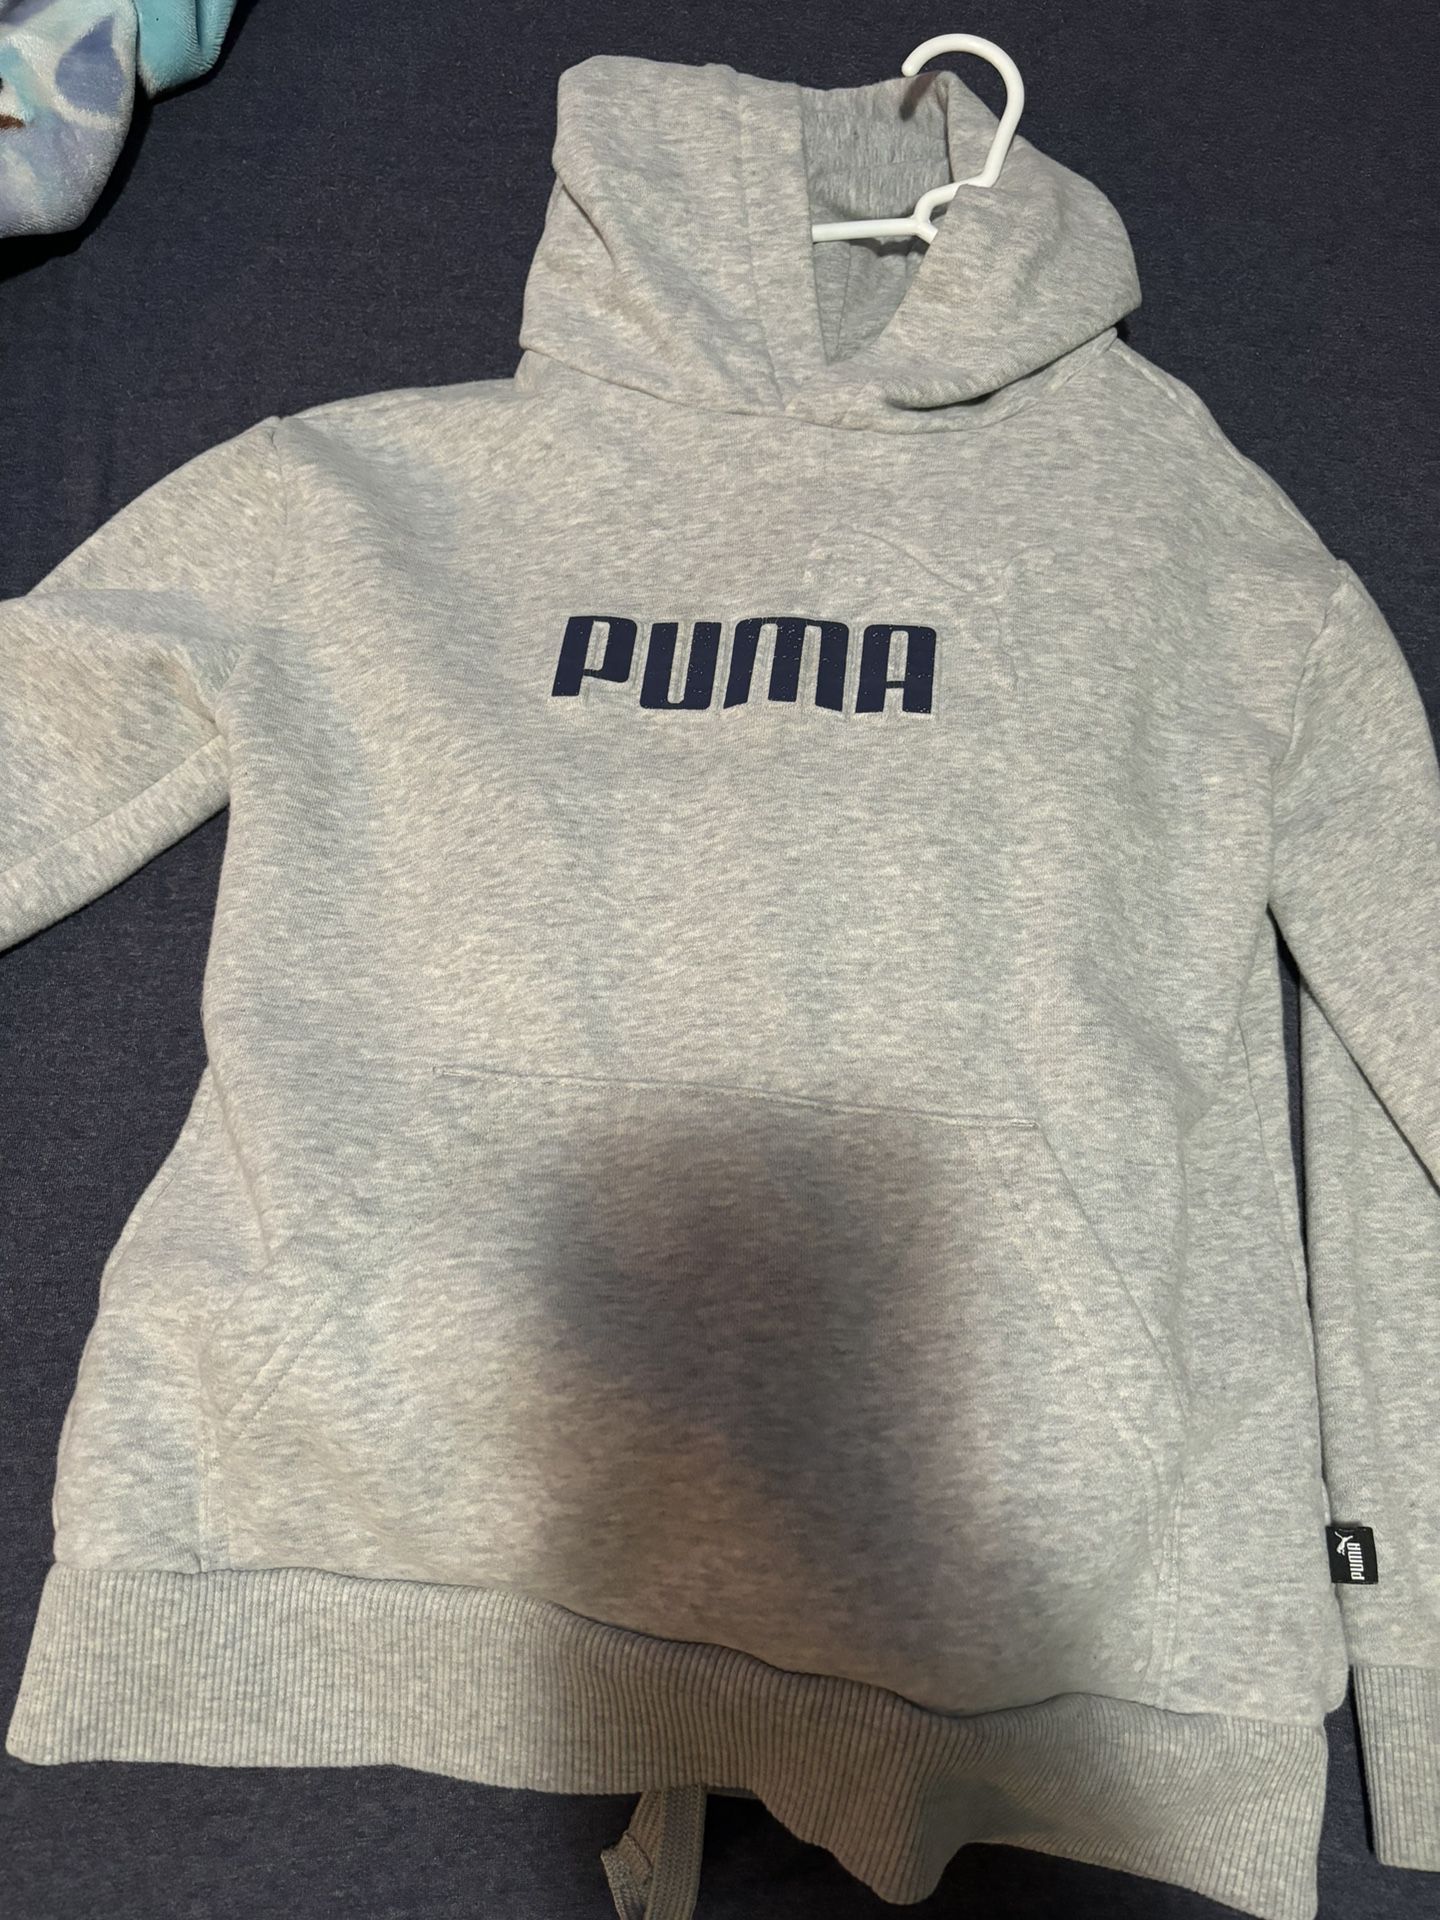 Puma Set for Sale in North Las Vegas, NV - OfferUp